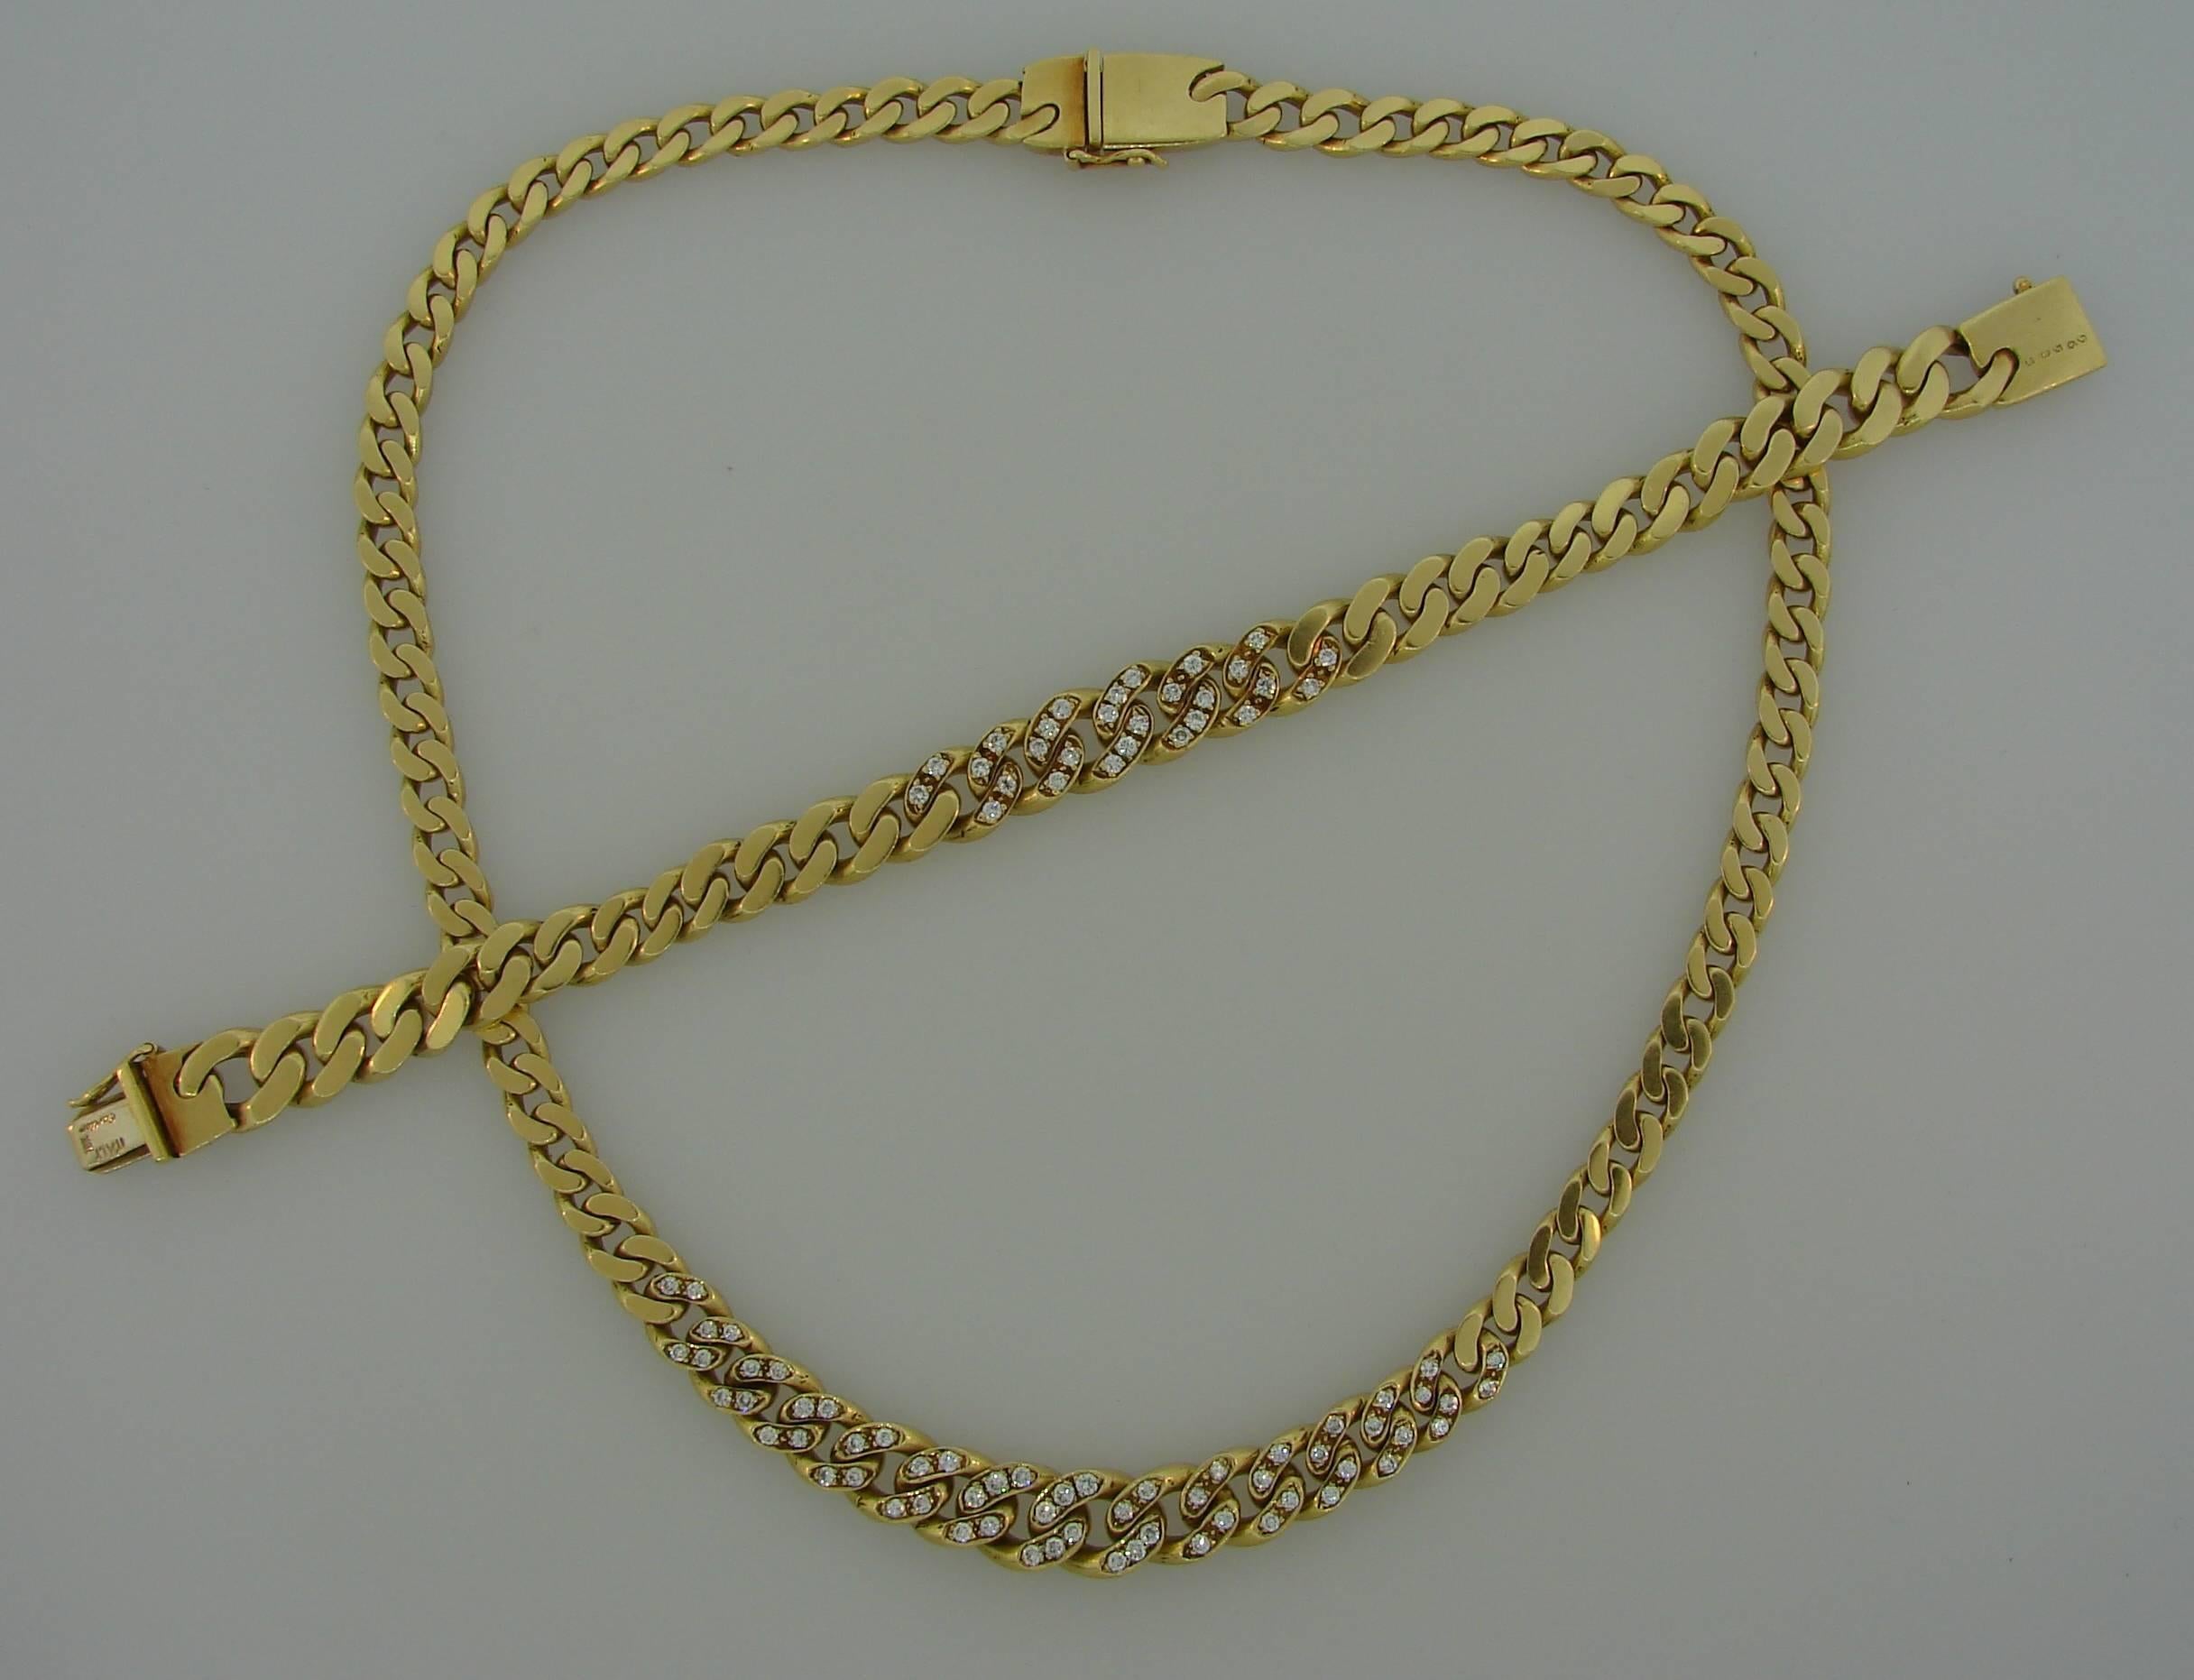 Nice and heavy diamond and yellow gold set consisting of a necklace and a bracelet created by Cartier in Italy in the 1970s. Classy, timeless and wearable, the set is a great addition to your jewelry collection. 
Made of 18 karat yellow gold and